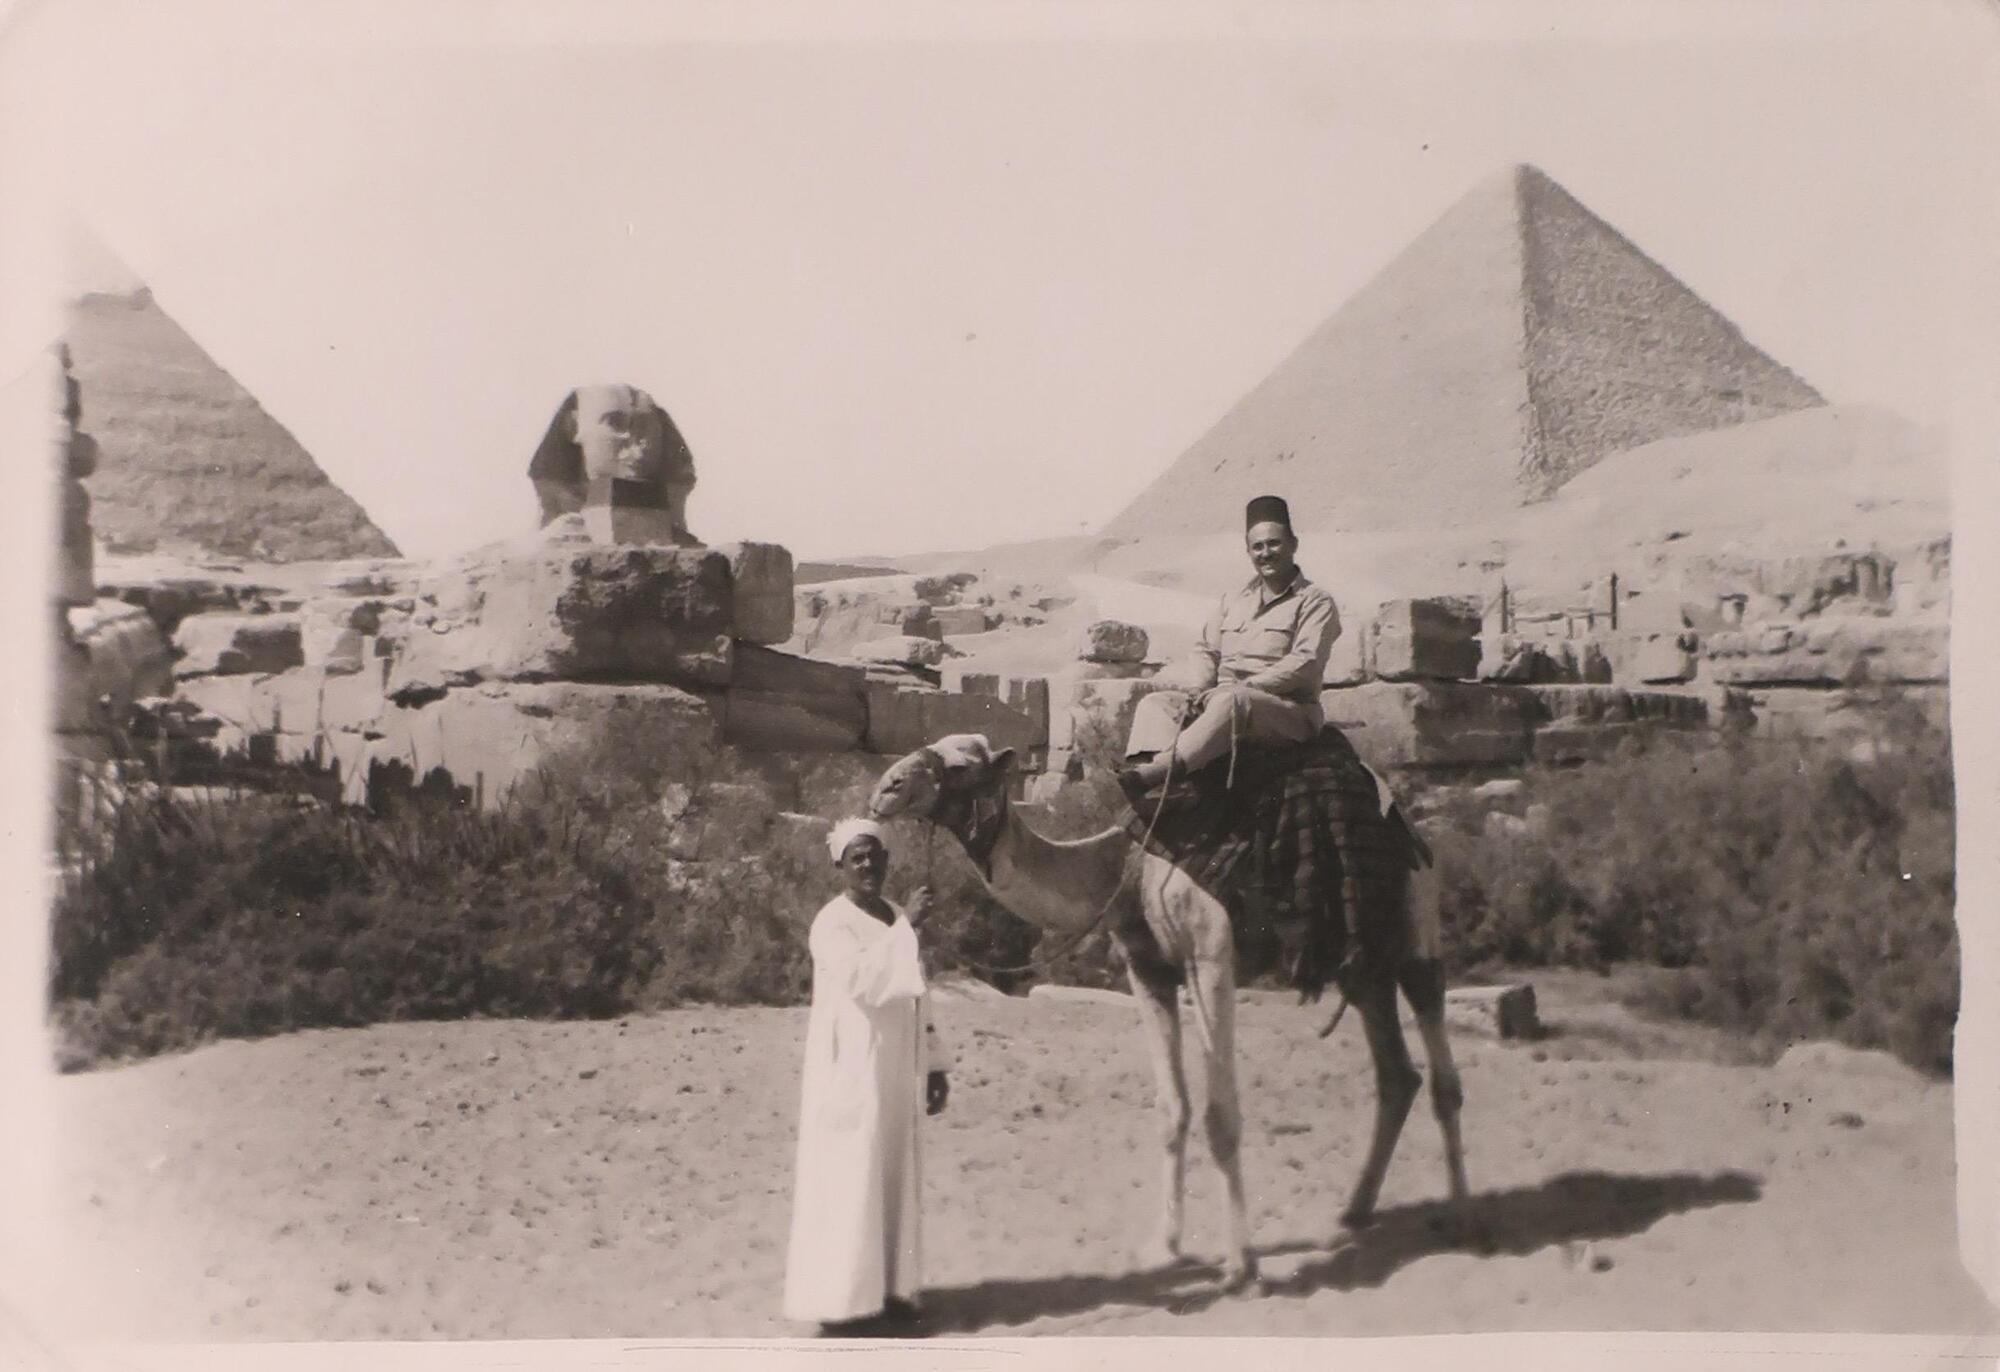 Two men, one standing and another riding a camel, in front of two pyramids and a sphinx statue in the distance.